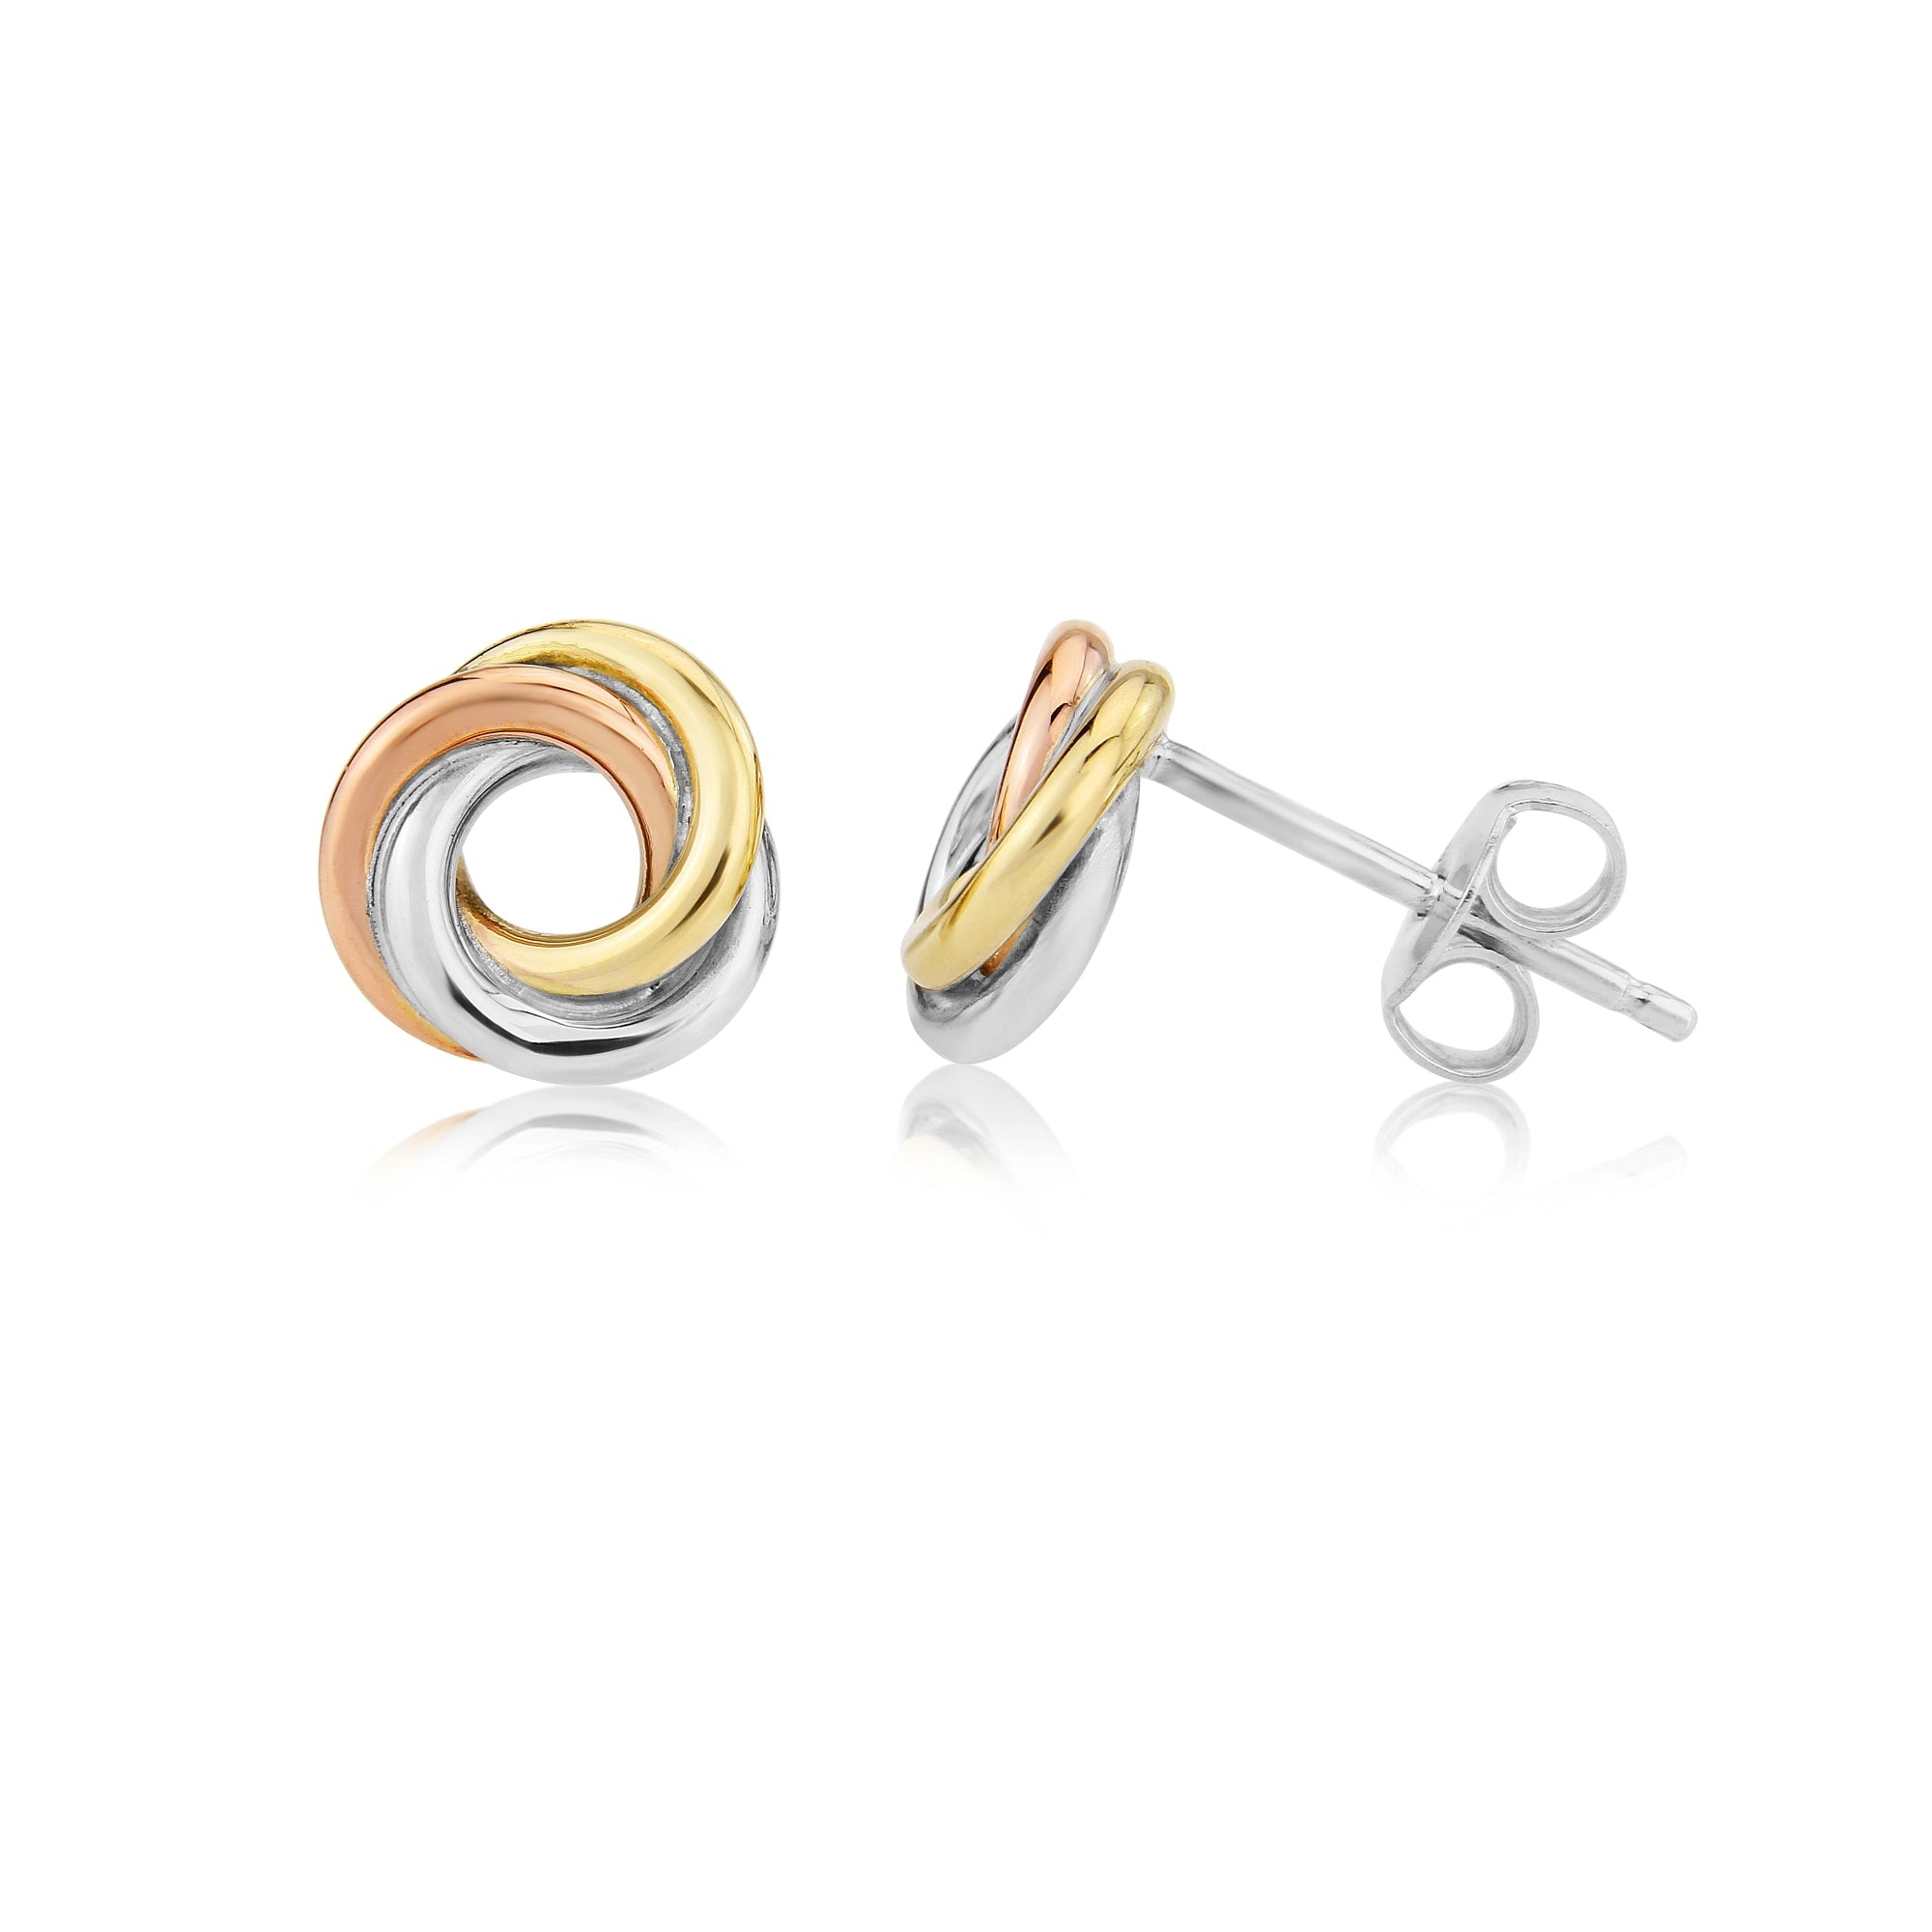 Handmade 9ct Yellow Gold, Rose Gold and Silver Stud Earrings